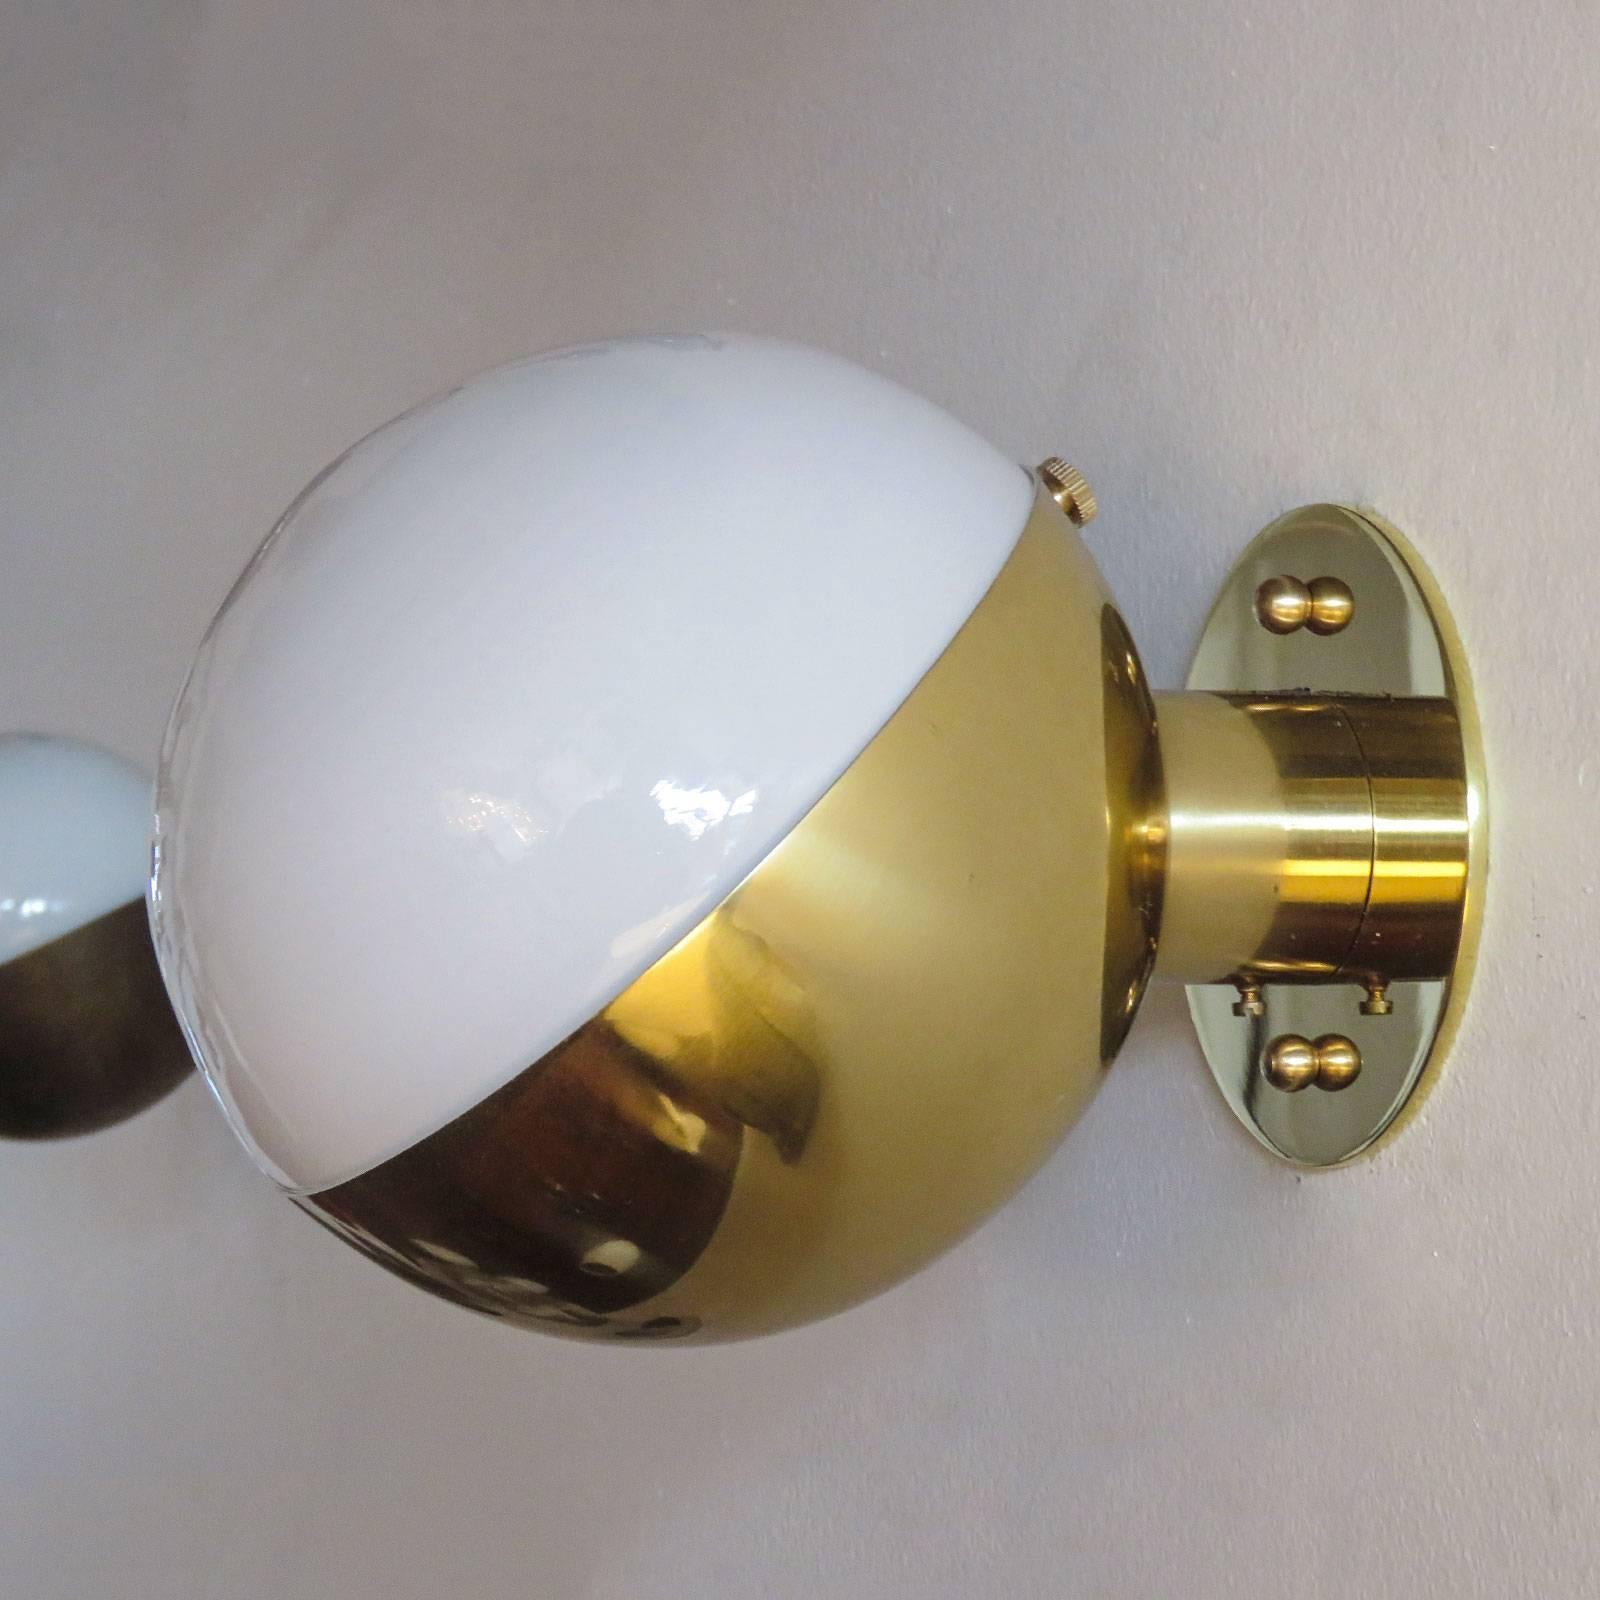 Remarkable 'Radiohuset' wall light, by Vilhelm Lauritzen for Louis Poulsen, in polished brass and opaline glass designed in 1931 for the Broadcasting House in Copenhagen.